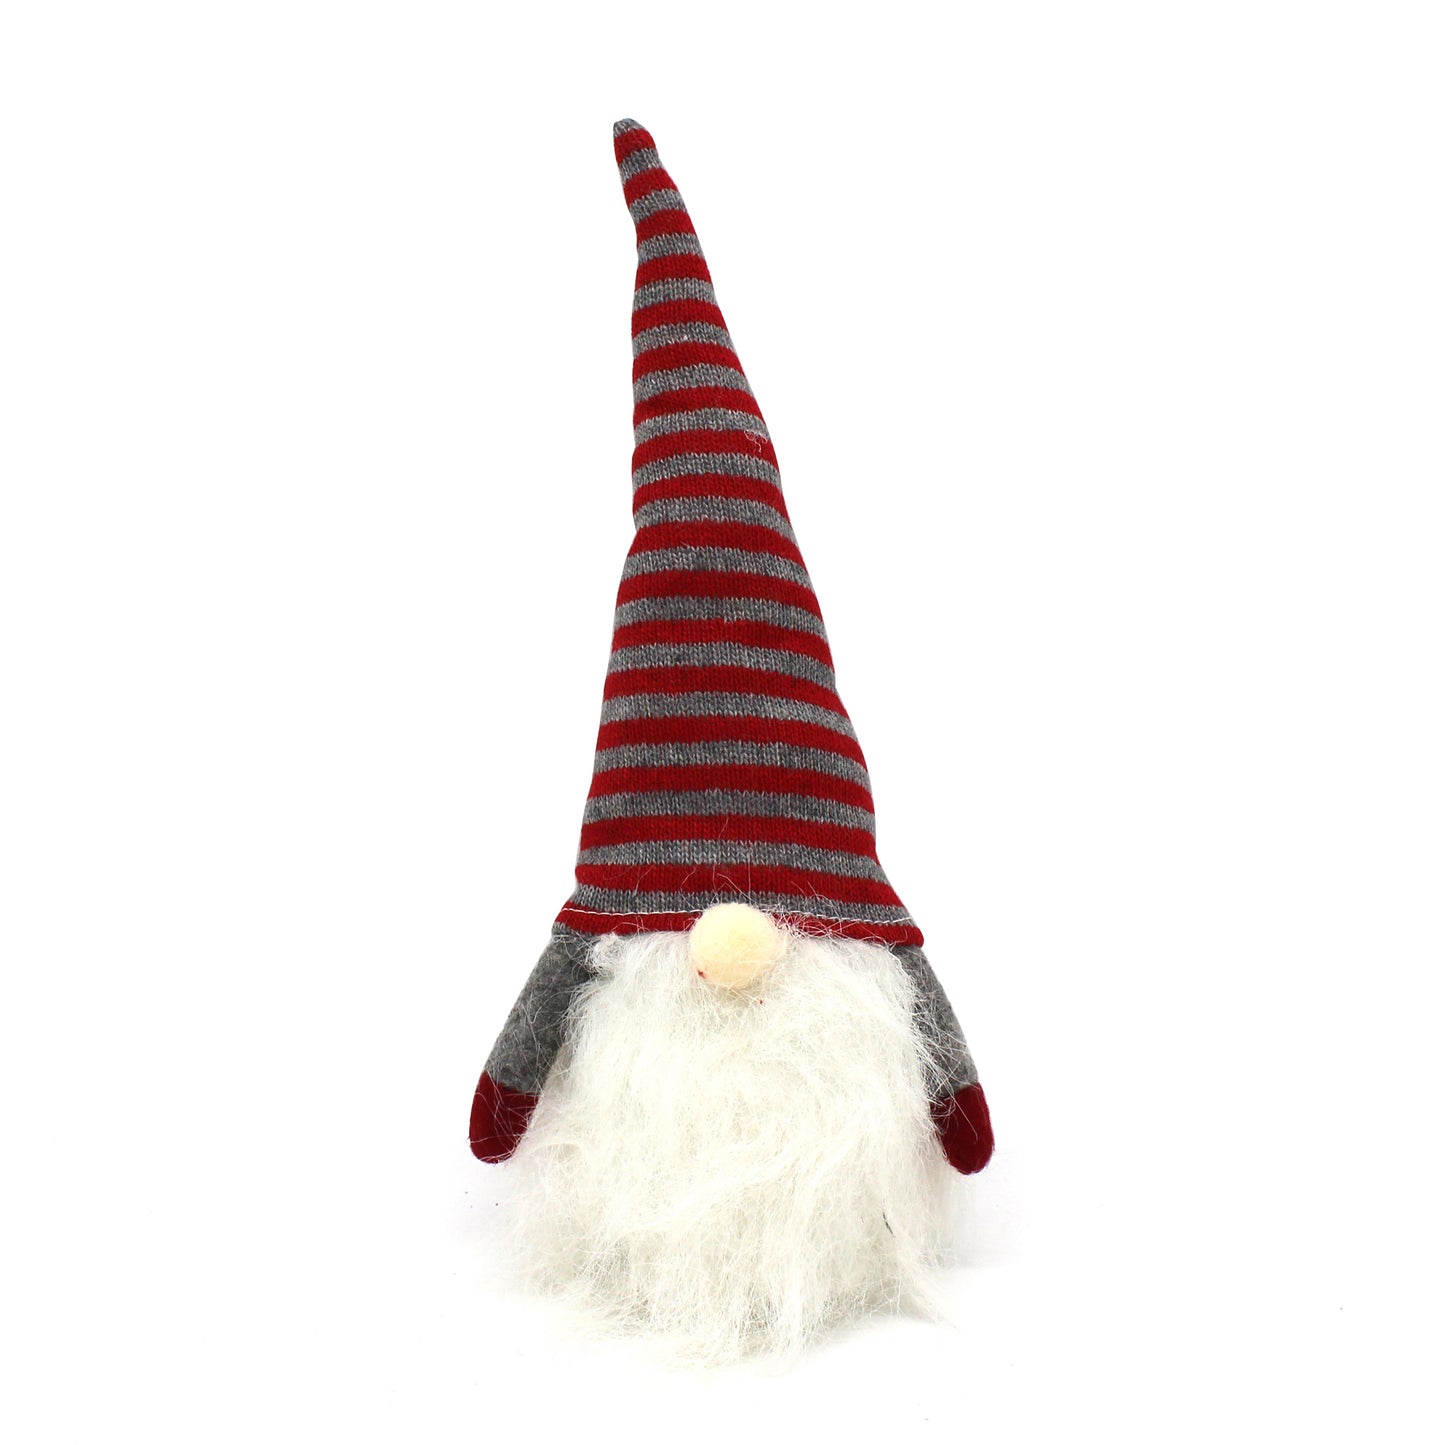 CVHOMEDECO. Hanging Swedish Gnome Plush Figurines Swedish Tomte for Home Décor, Winter Ornaments, Christmas and Festival Party Decorations, 10 Inches, 2 Assorted